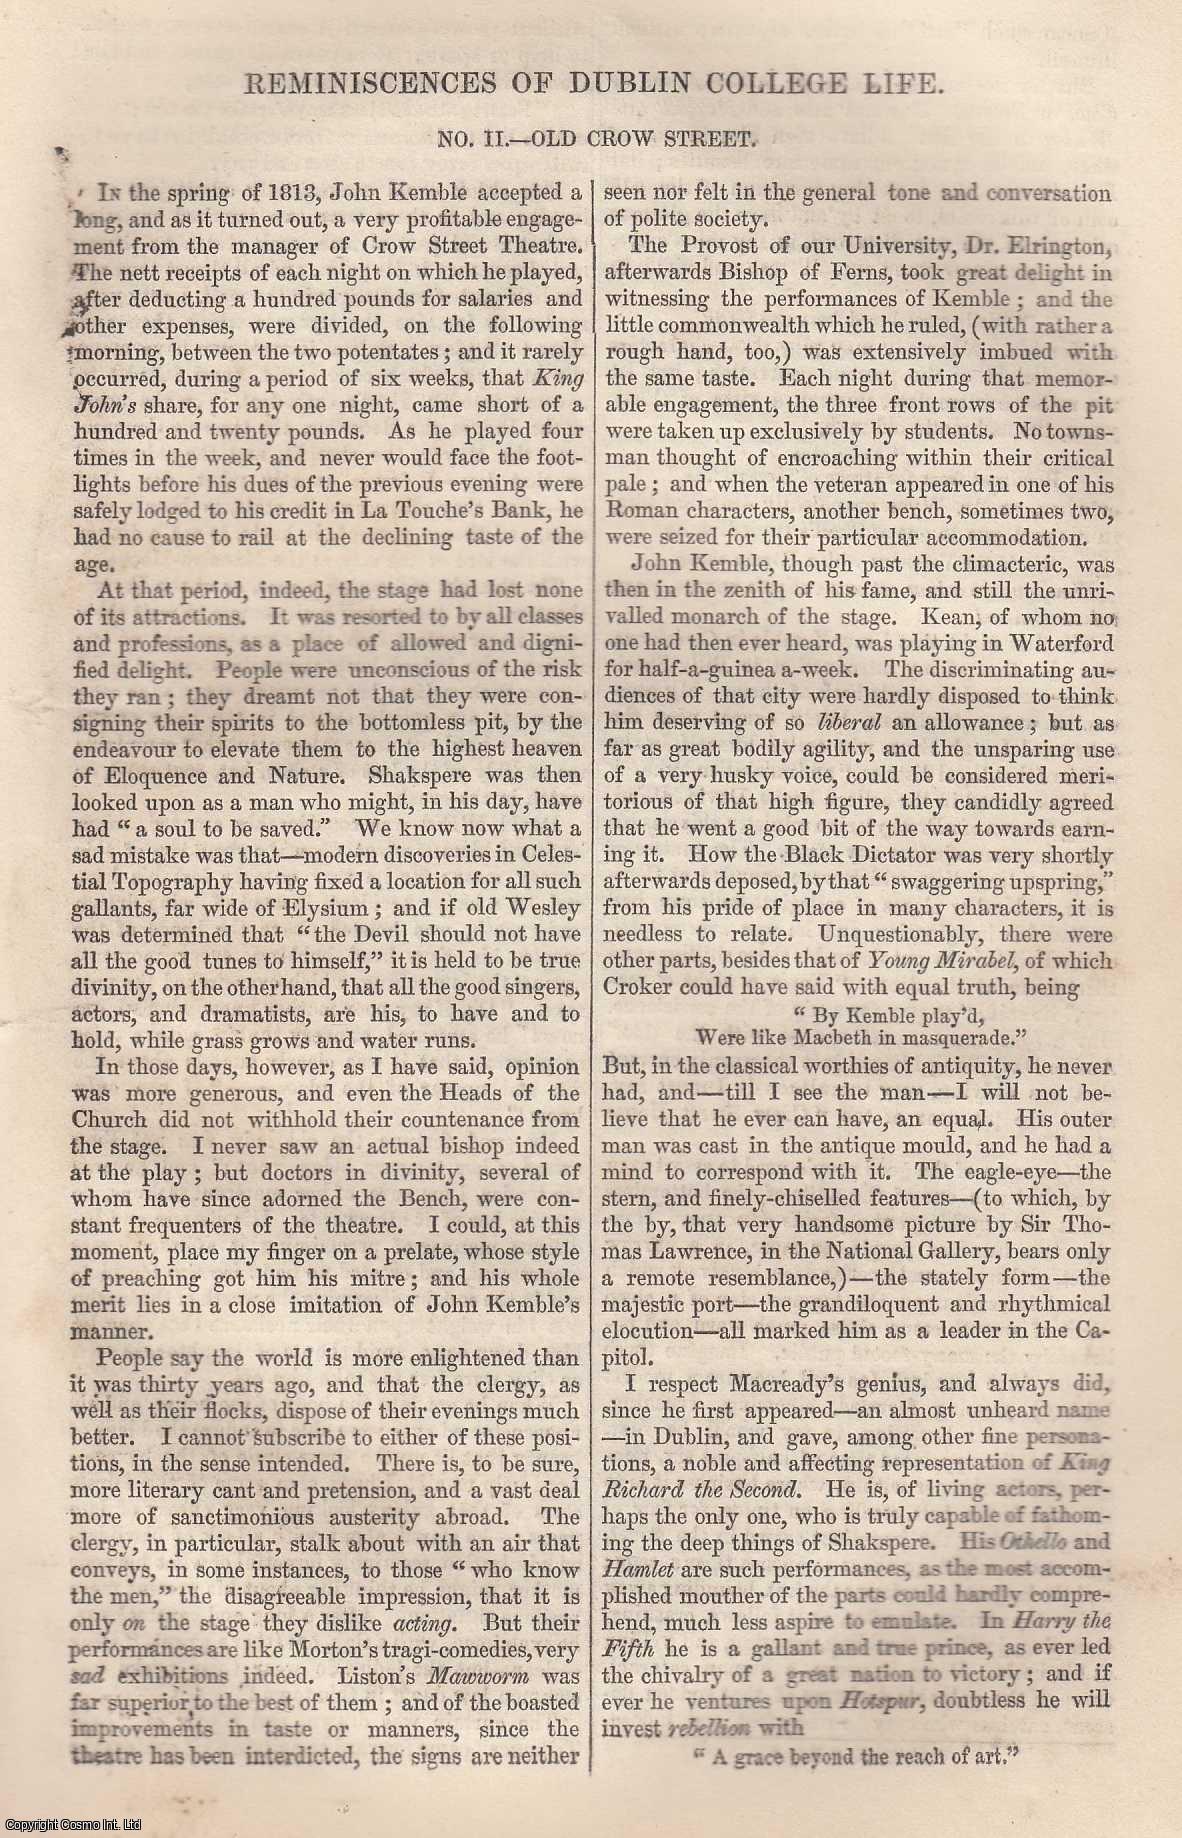 --- - Reminiscences of Dublin College Life. Old Crow Street. An original article from Tait's Edinburgh Magazine, 1843.